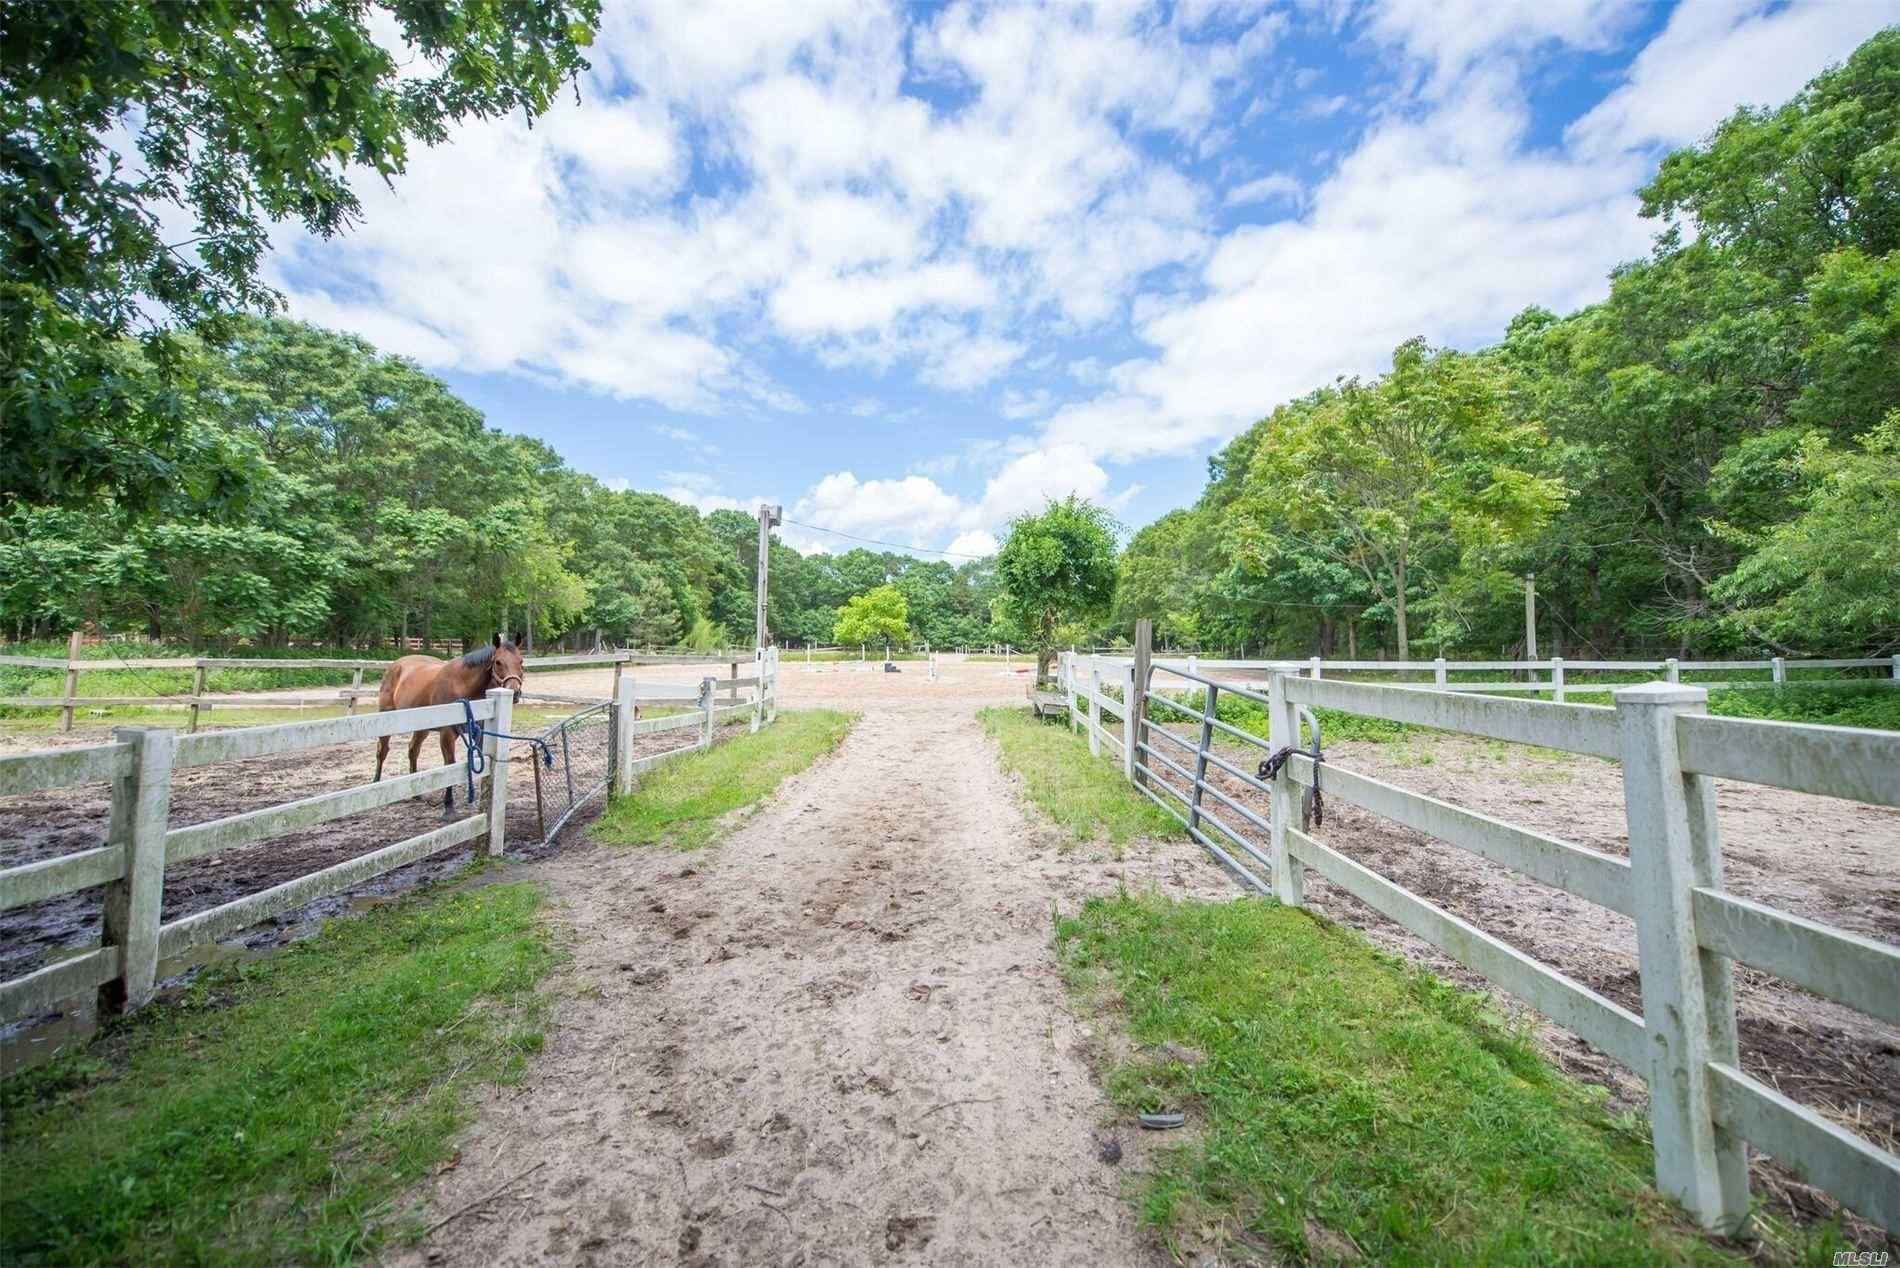 SPECTACULAR HORSE FARM ON 6 ACRES SUBDIVIDE ABLE INTO 3 LOTS.